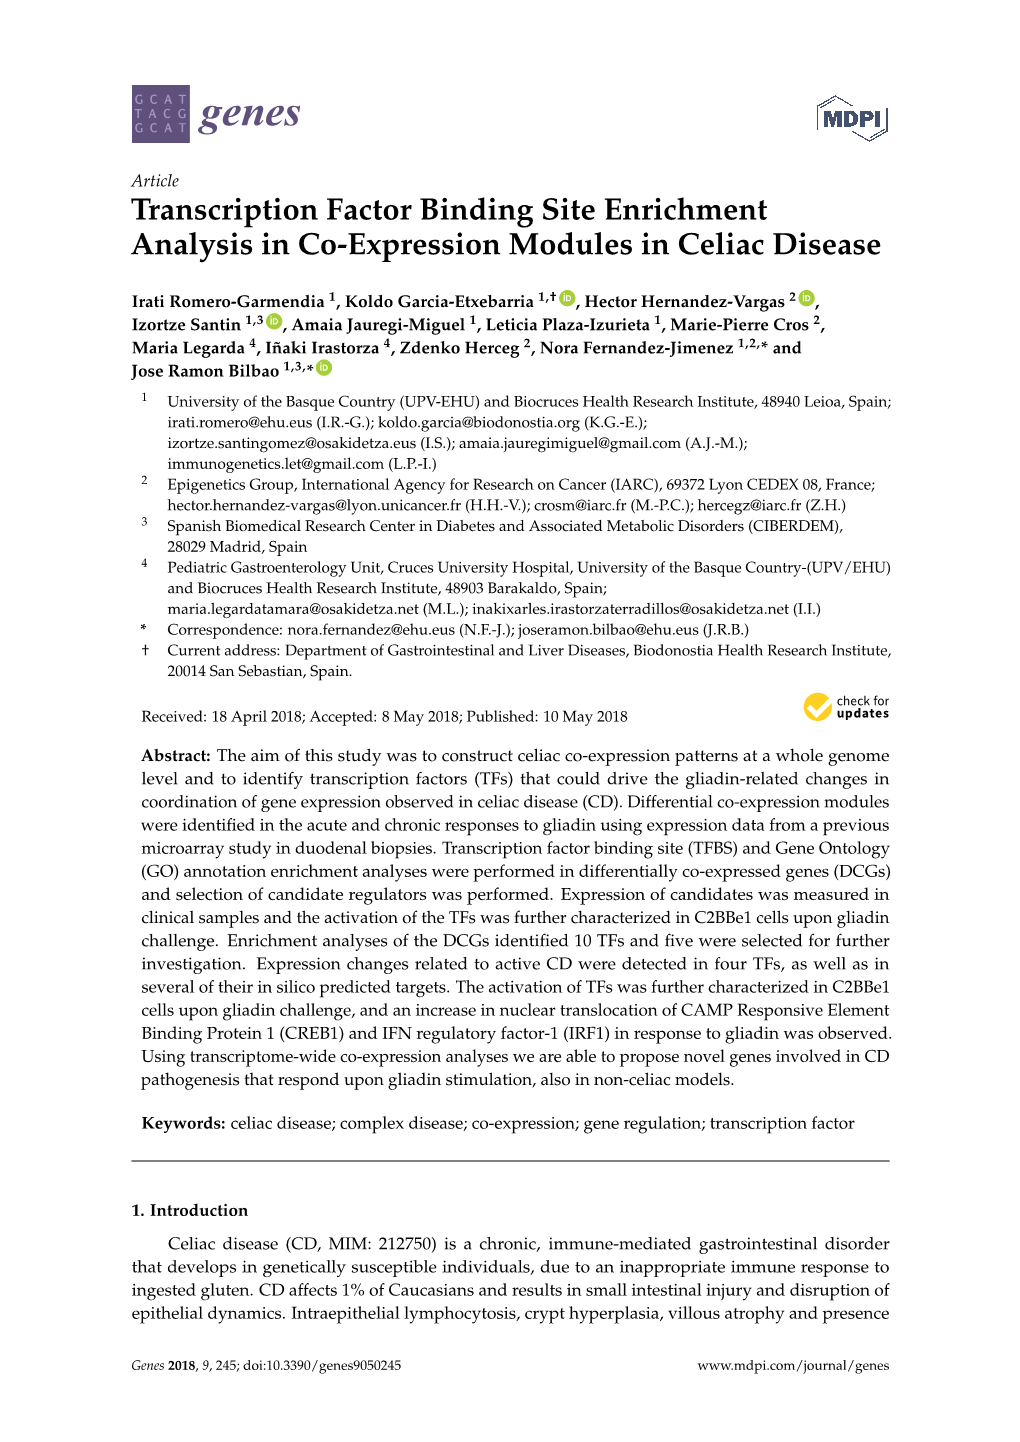 Transcription Factor Binding Site Enrichment Analysis in Co-Expression Modules in Celiac Disease